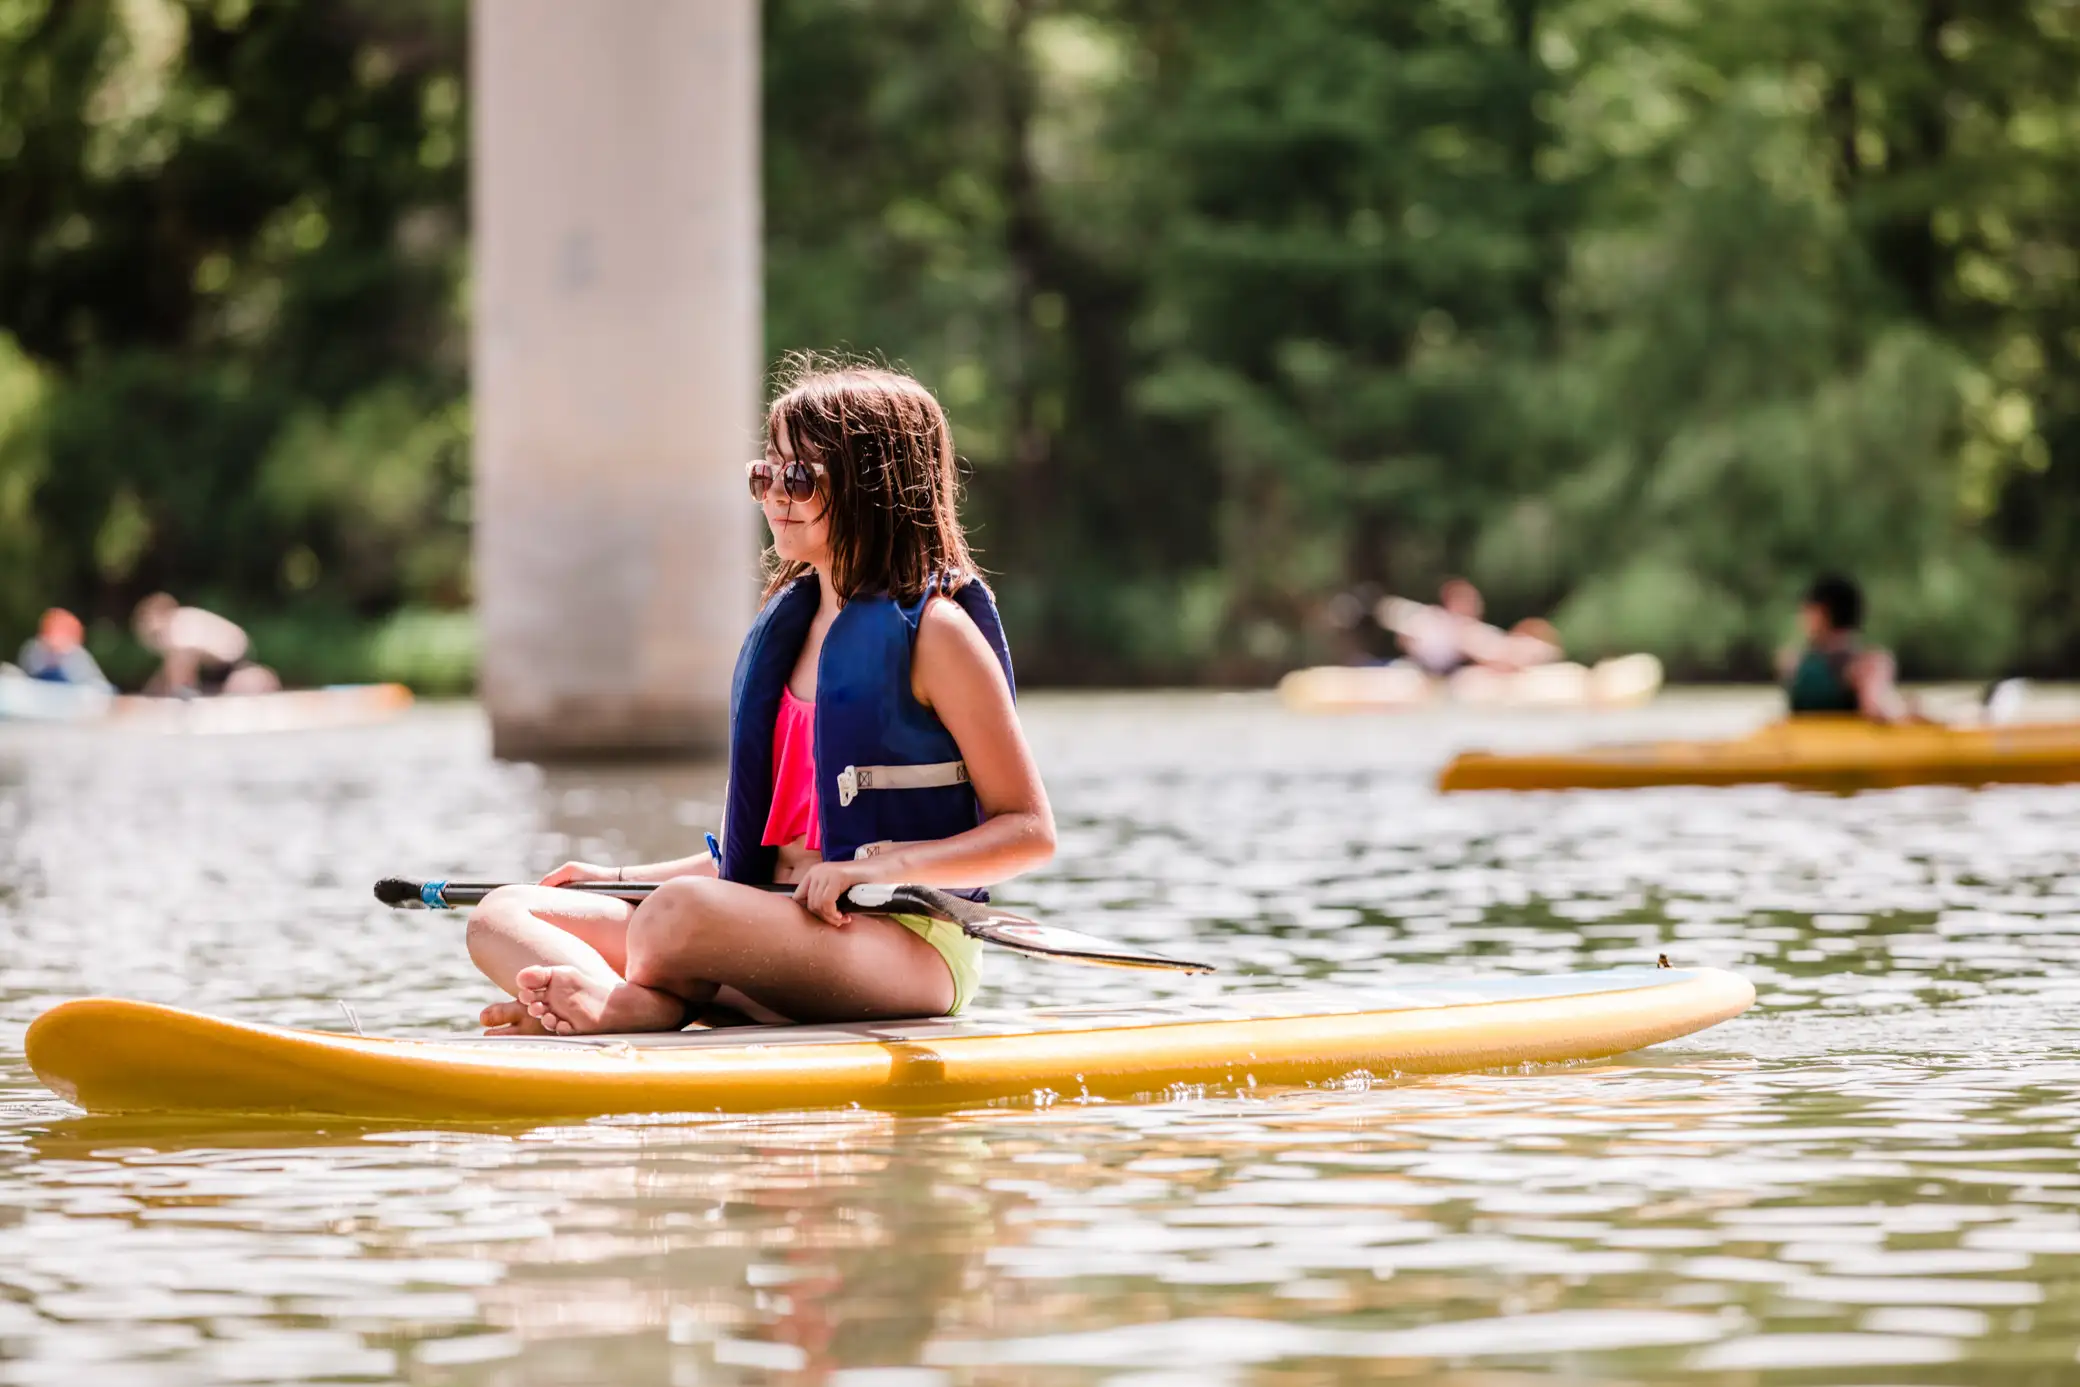 A photo of a young girl on a kayak